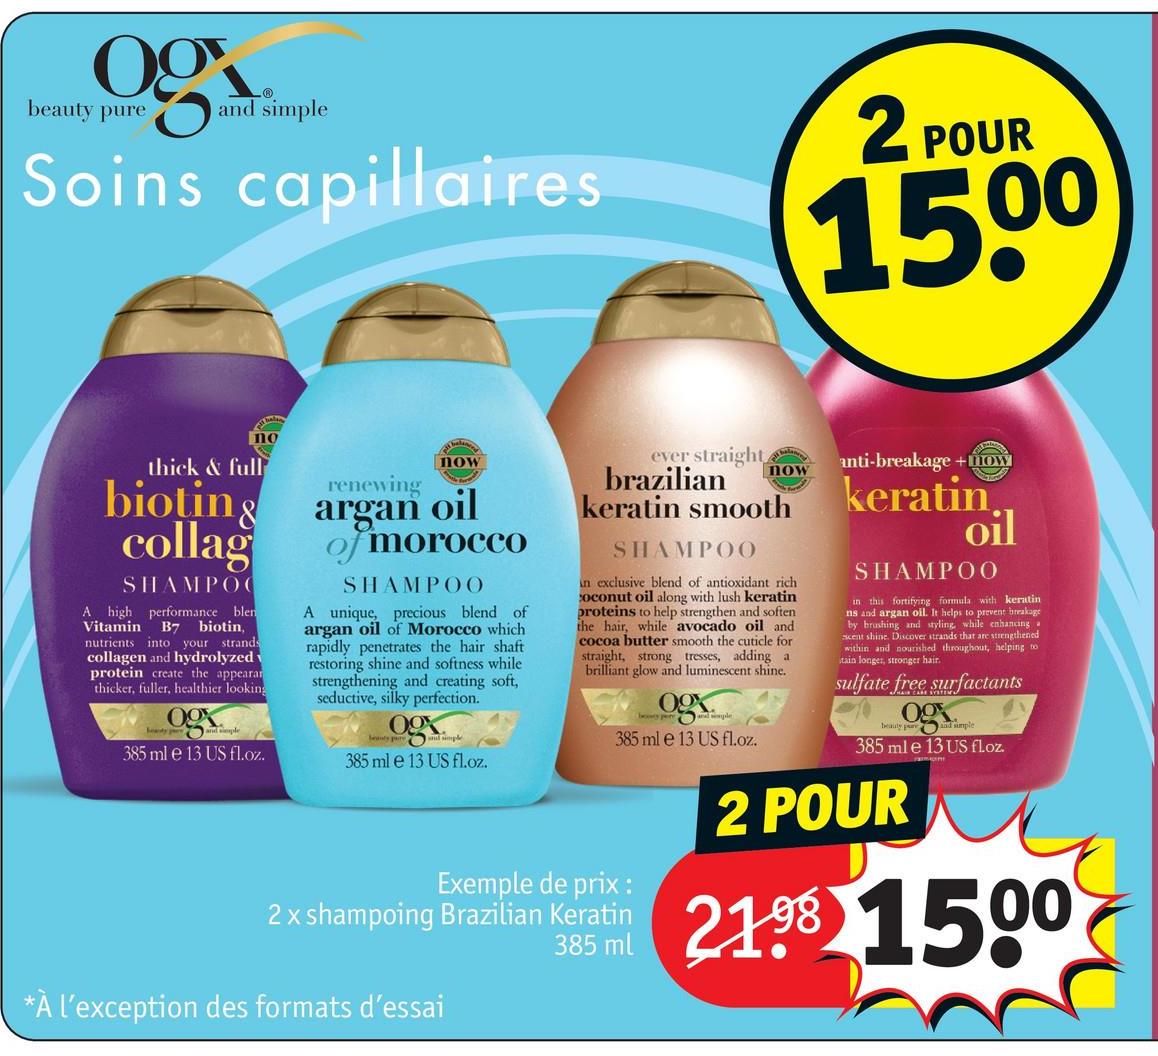 og
beauty pure
-Ⓡ
and simple
Soins capillaires
2 POUR
1500
no
thick & full
now
renewing
bioting argan oil
collag
SHAMPOO
A high performance blen
Vitamin B7 biotin,
nutrients into your strands
collagen and hydrolyzed
protein create the appearan
thicker, fuller, healthier looking
09
385 ml e 13 US fl.oz.
of morocco
SHAMPOO
A unique, precious blend of
argan oil of Morocco which
rapidly penetrates the hair shaft
restoring shine and softness while
strengthening and creating soft,
seductive, silky perfection.
ogx
now
anti-breakage+now
ever straight
brazilian
keratin smooth
SHAMPOO
in exclusive blend of antioxidant rich
coconut oil along with lush keratin
proteins to help strengthen and soften
the hair, while avocado oil and
cocoa butter smooth the cuticle for
straight, strong tresses, adding a
brilliant glow and luminescent shine.
385 ml e 13 US fl.oz.
385 ml e 13 US fl.oz.
Exemple de prix :
385 ml
2x shampoing Brazilian Keratin
keratin.
oil
SHAMPOO
in this fortifying formula with keratin
ns and argan oil. It helps to prevent breakage
by brushing and styling, while enhancing
scent shine. Discover strands that are strengthened
within and nourished throughout, helping to
tain longer, stronger hair.
sulfate free surfactants
beauty and simple
385 ml e 13 US floz.
2 POUR
21.98 1500
*À l'exception des formats d'essai